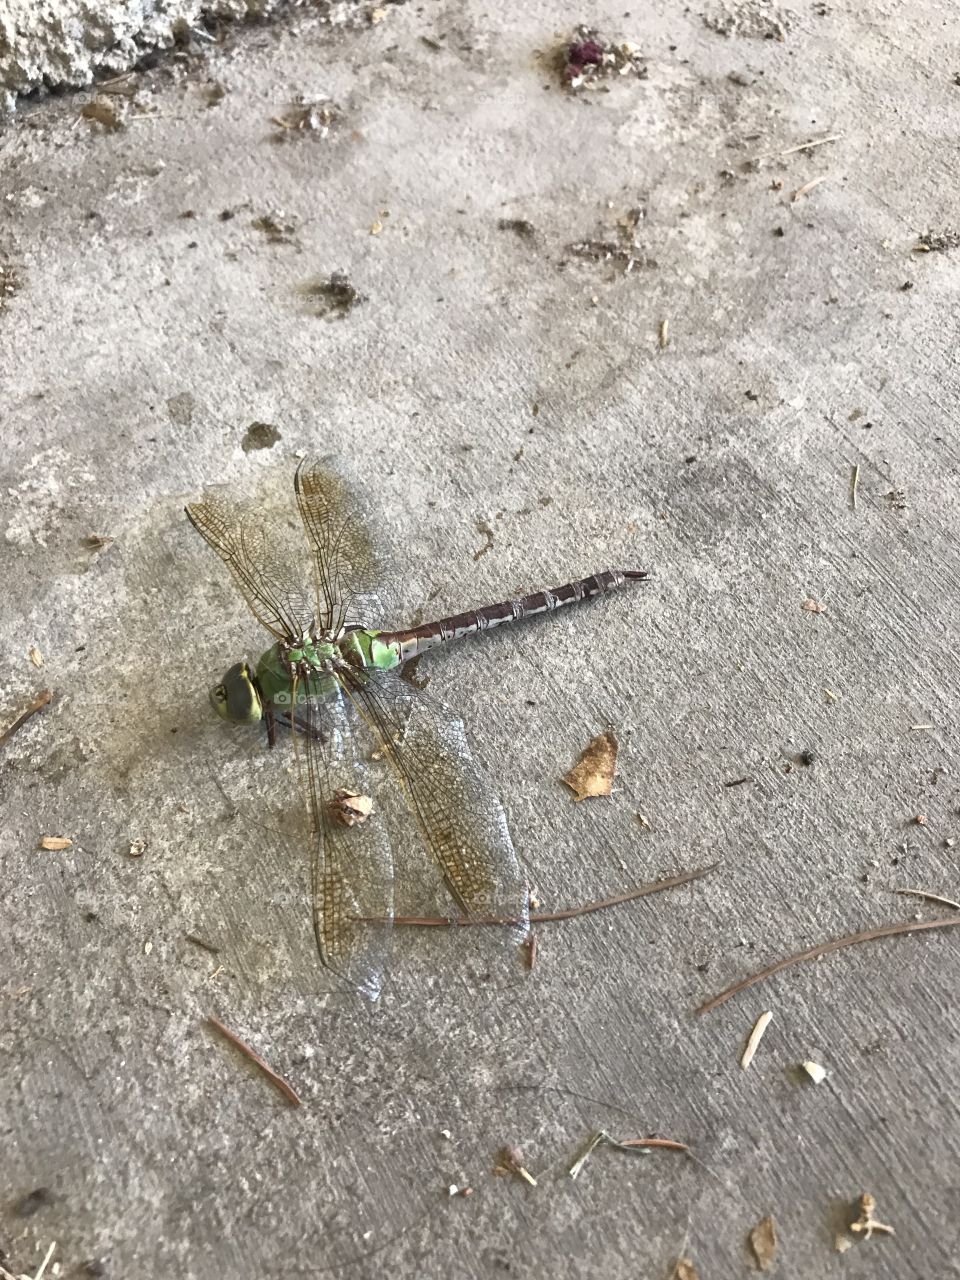 Dragonfly - Dead 